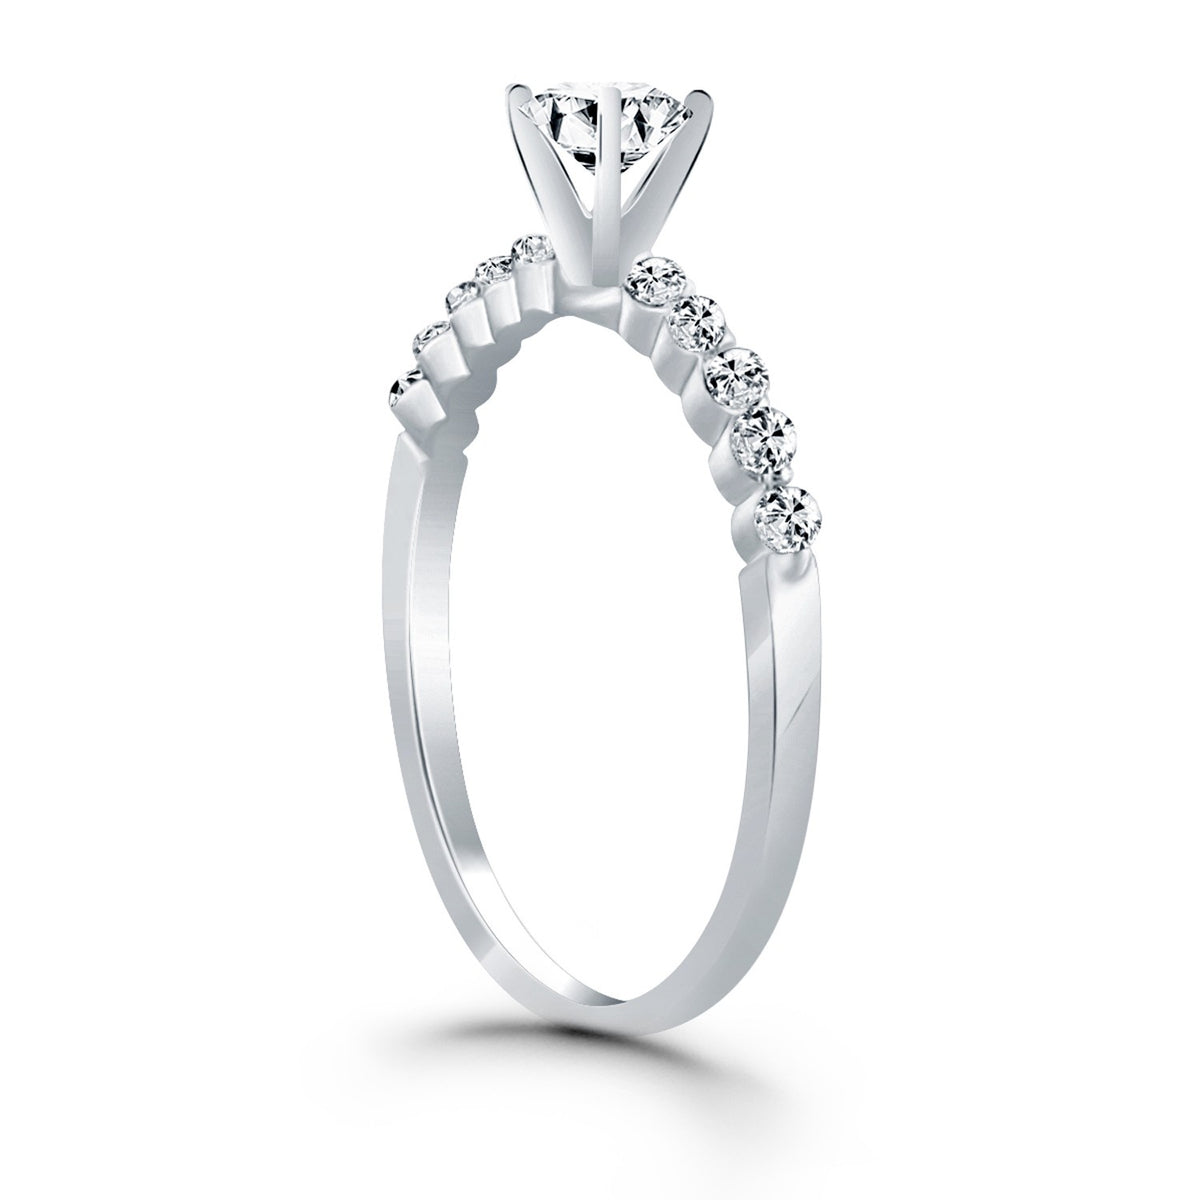 Diamond Engagement Ring with Shared Prong Diamond Accents - 14k White Gold